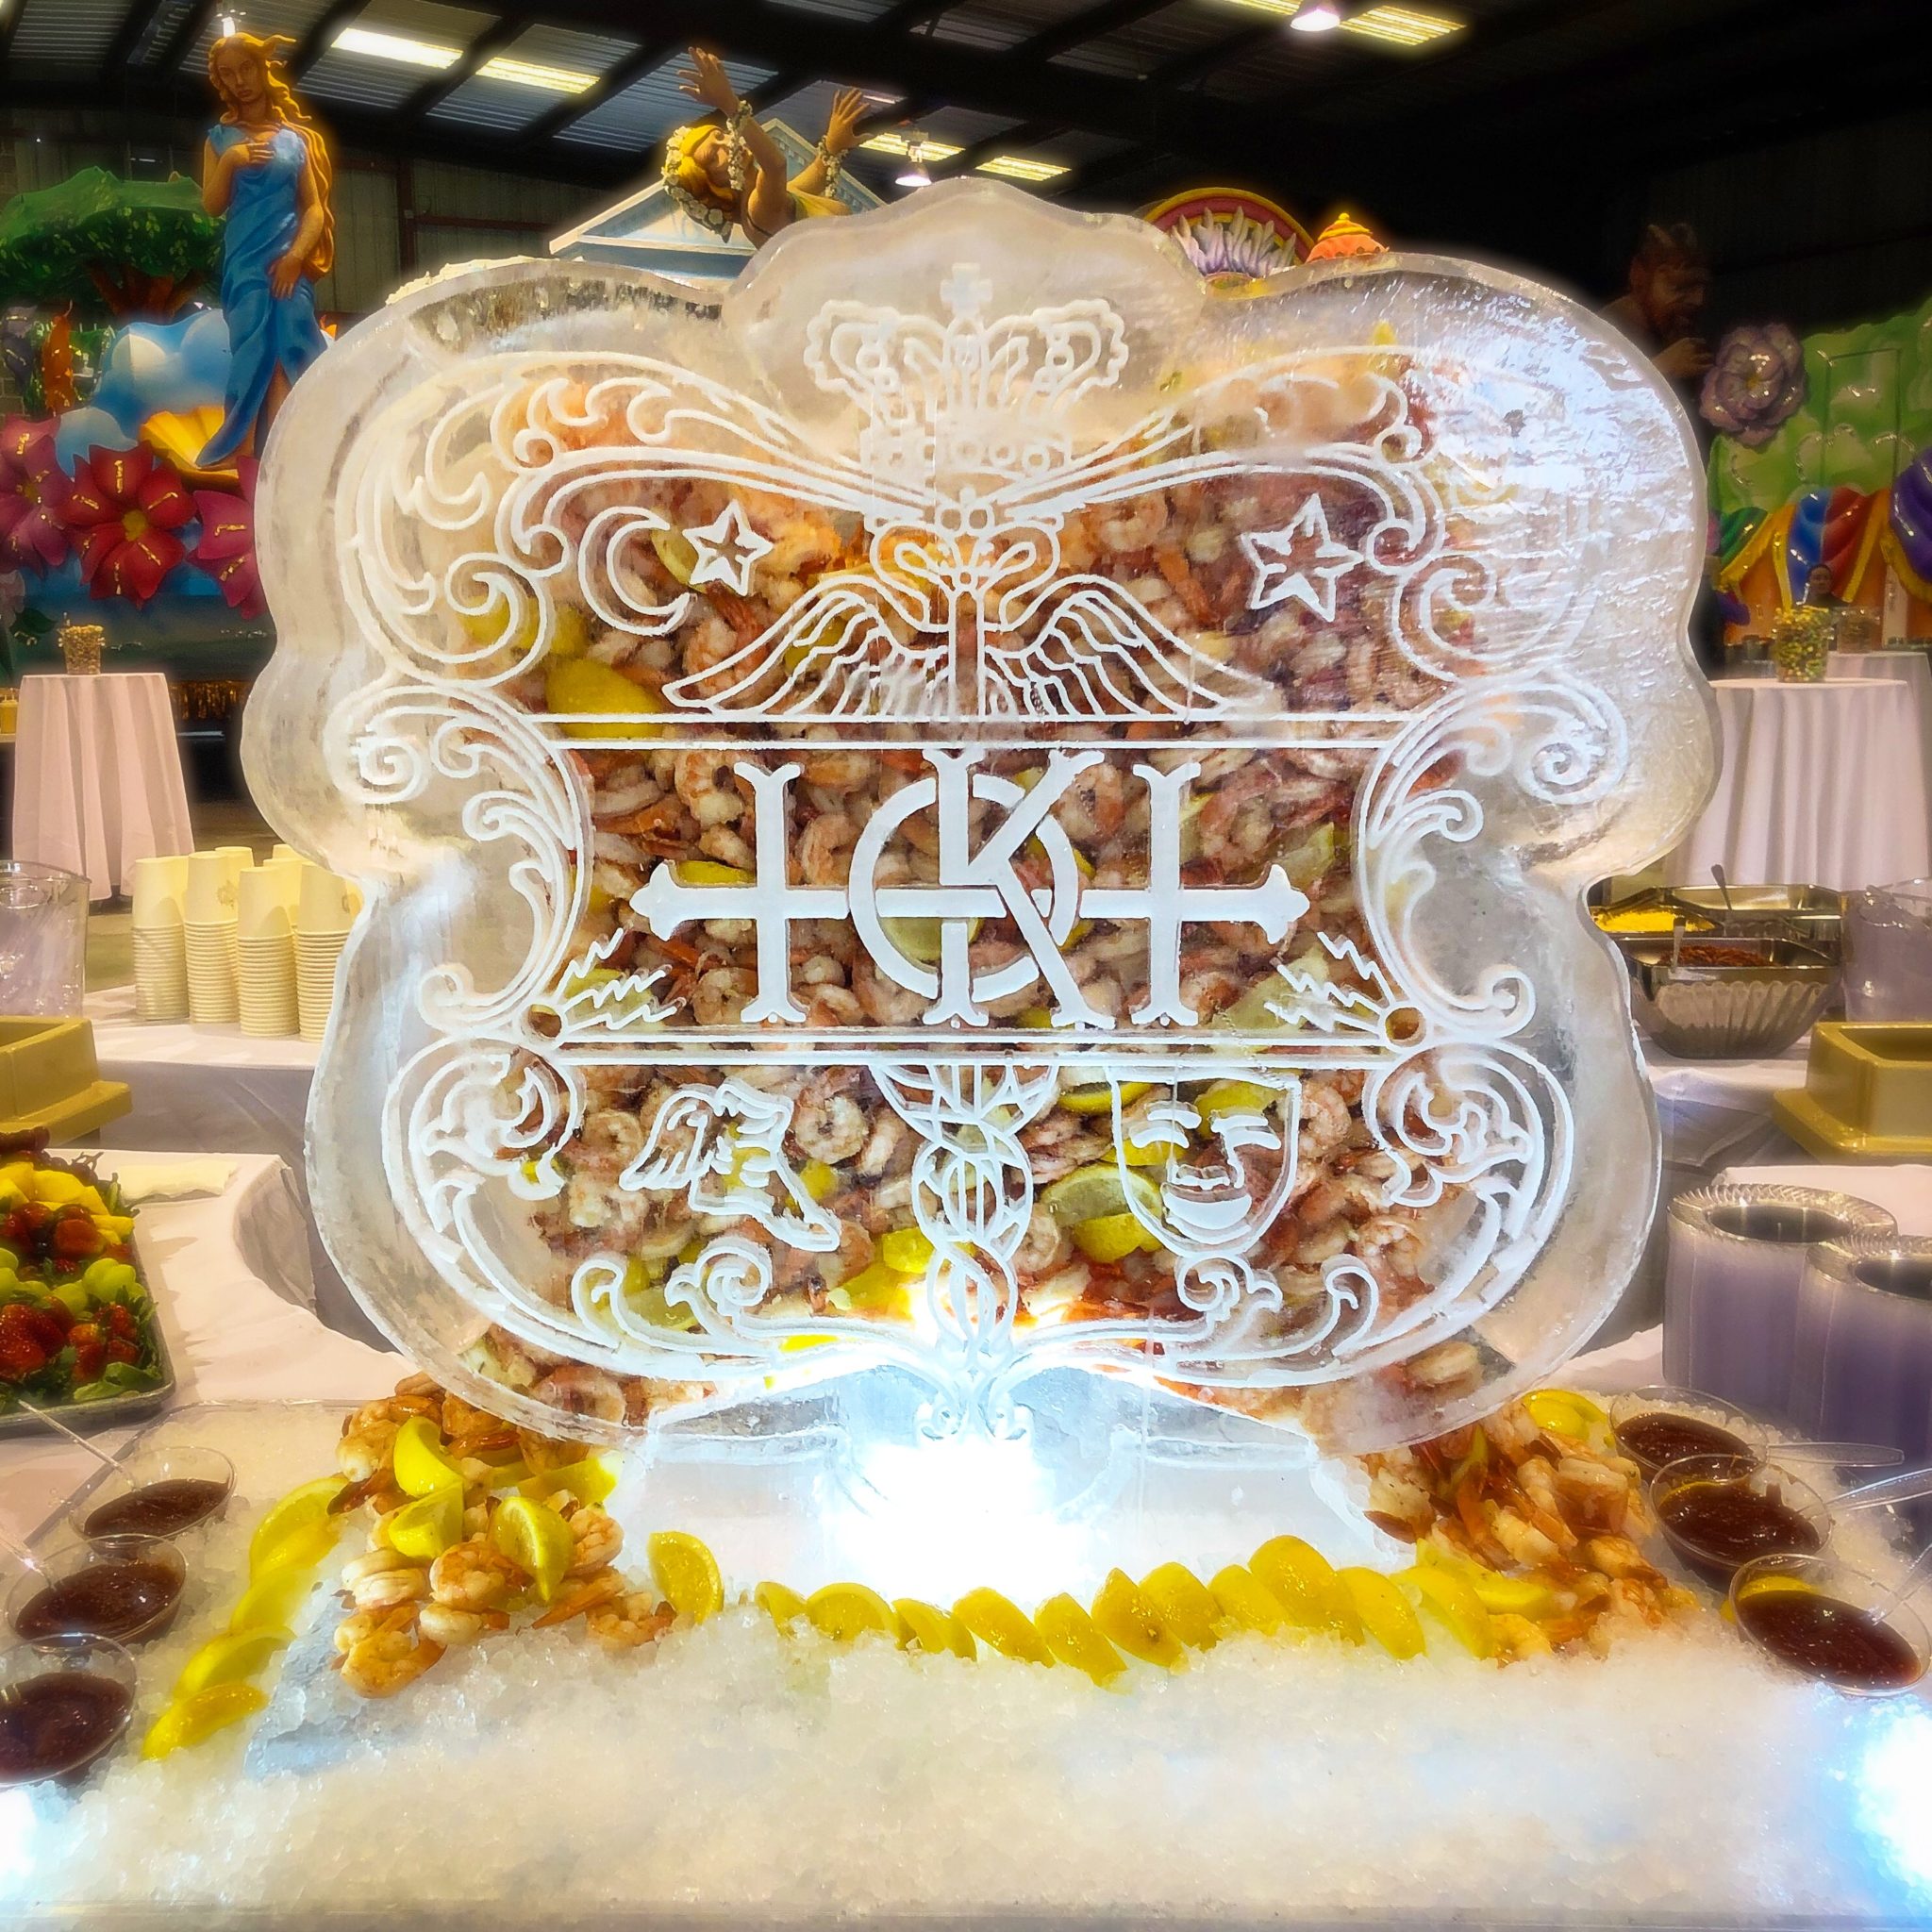 shrimp flows out both sides of a Krewe of Hermes ice sculpture